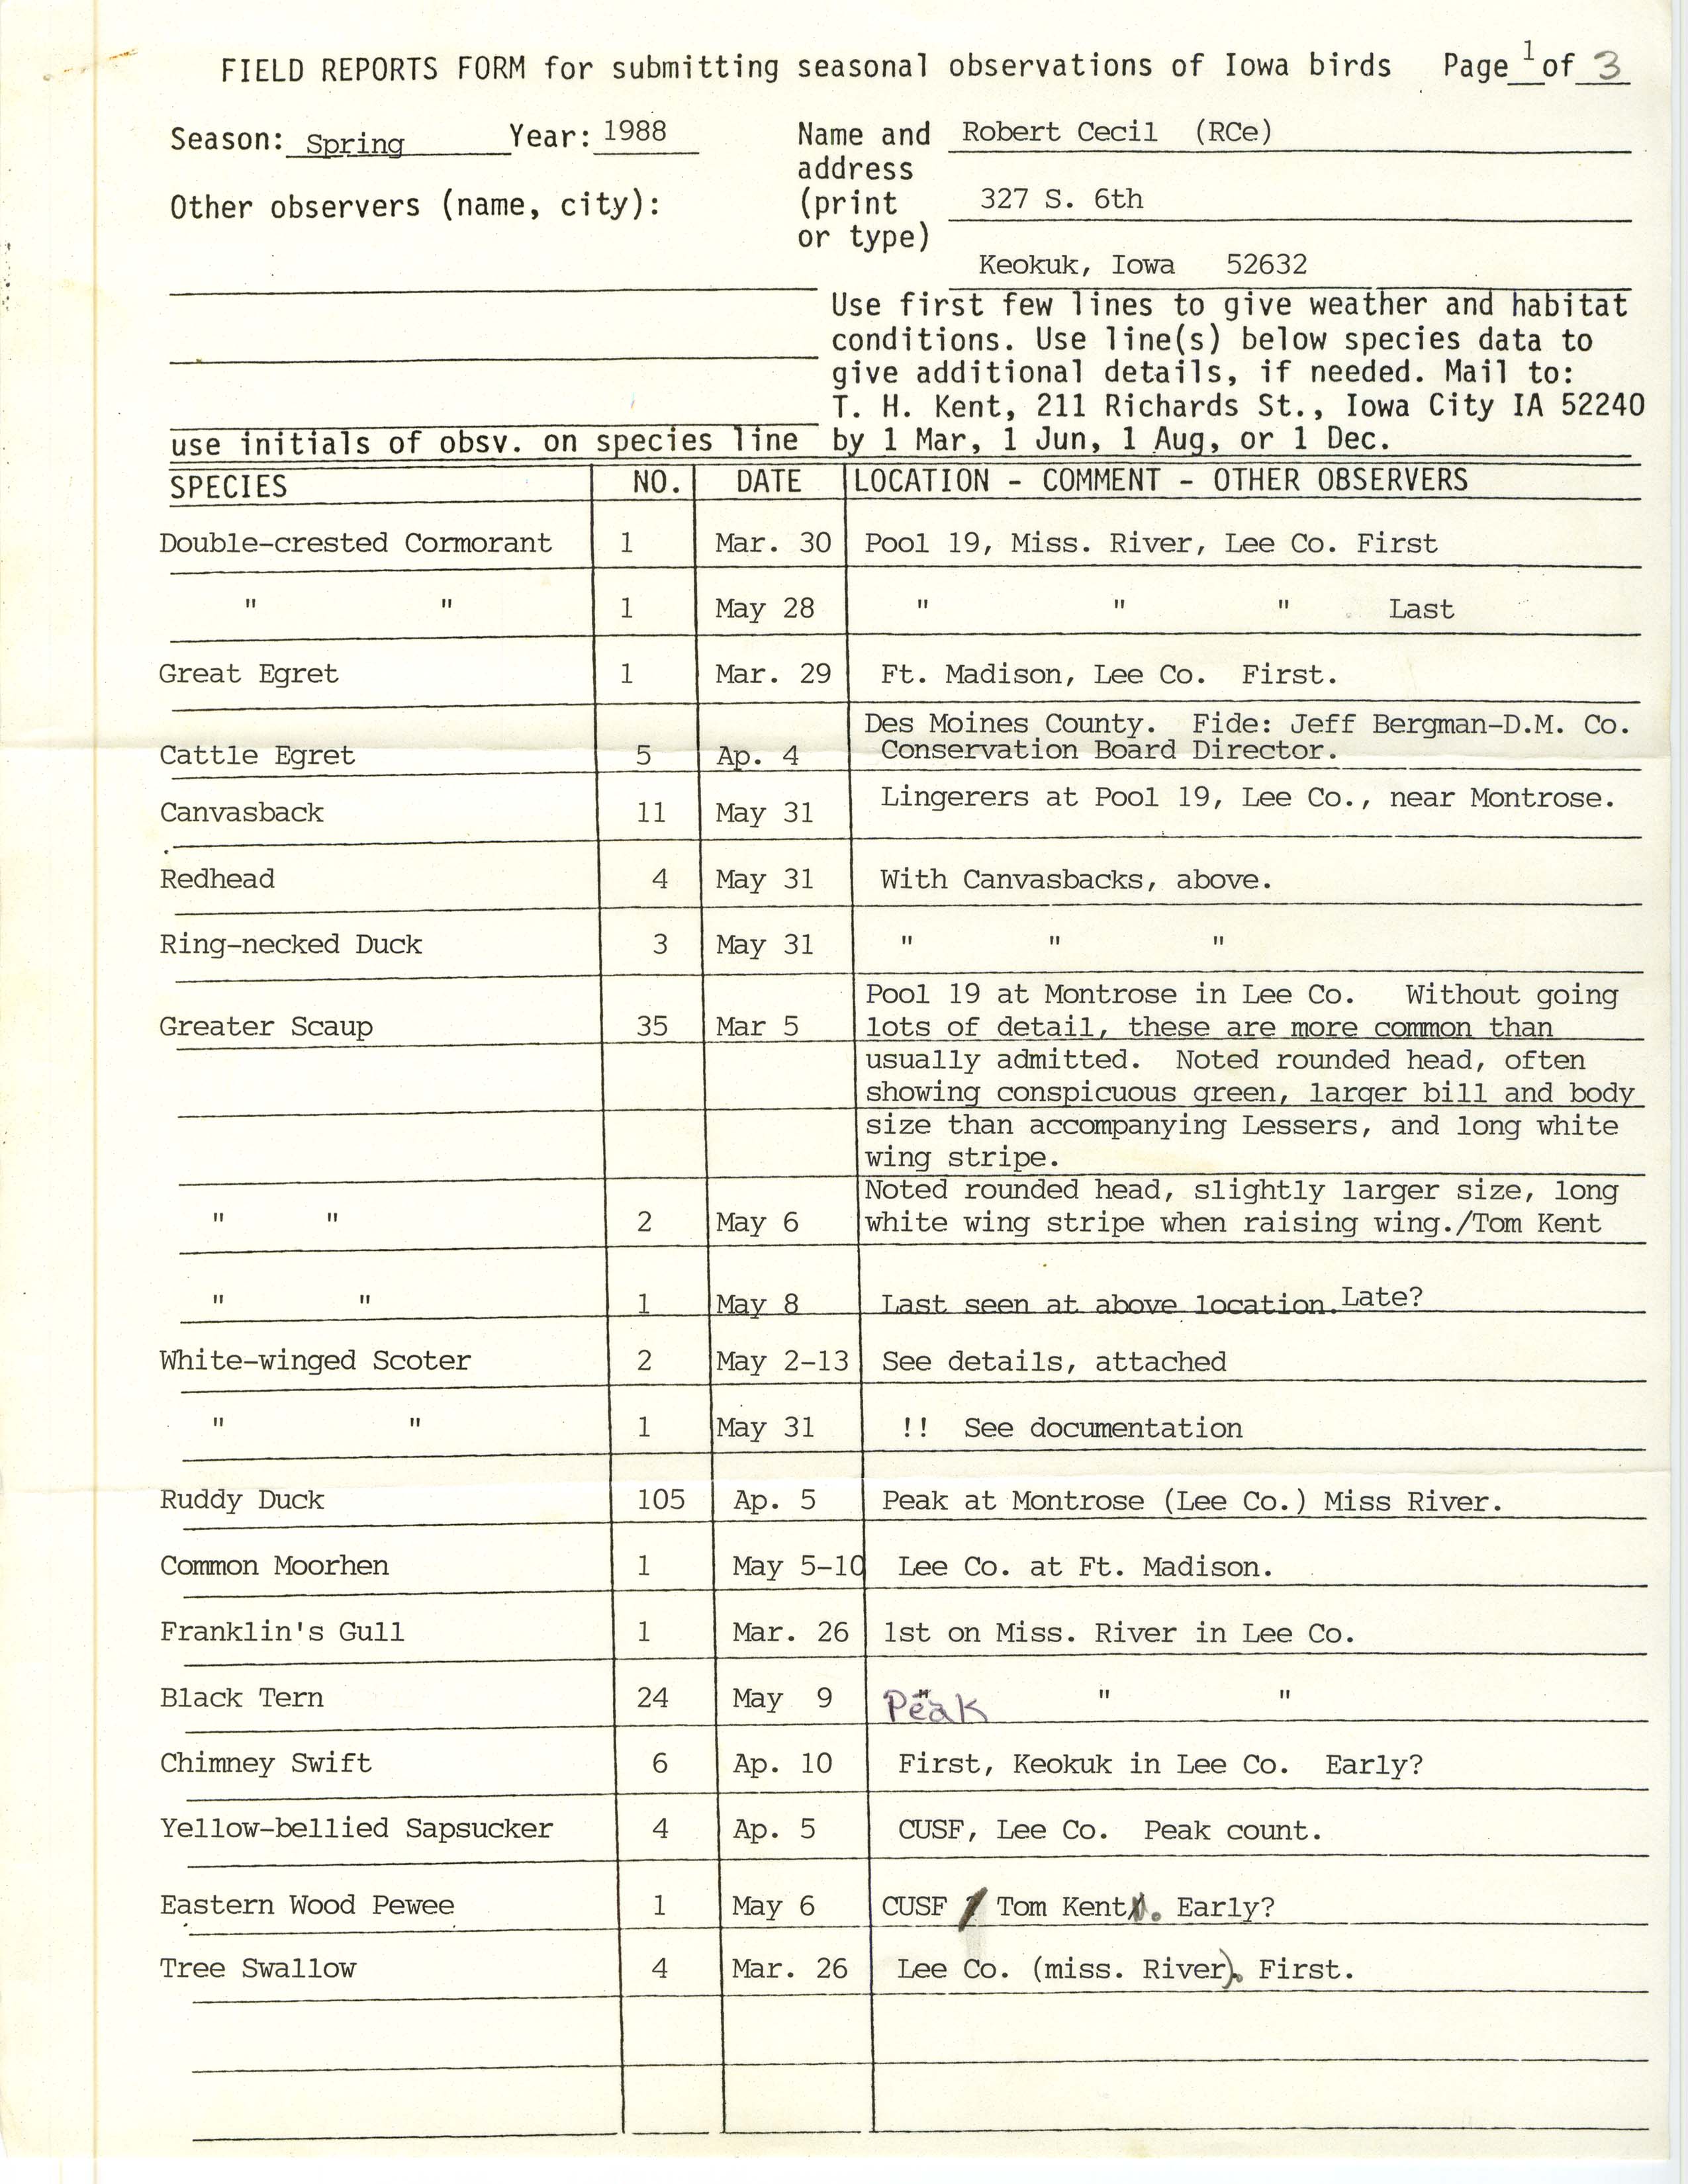 Field reports form for submitting seasonal observations of Iowa birds, Robert I. Cecil, spring 1988